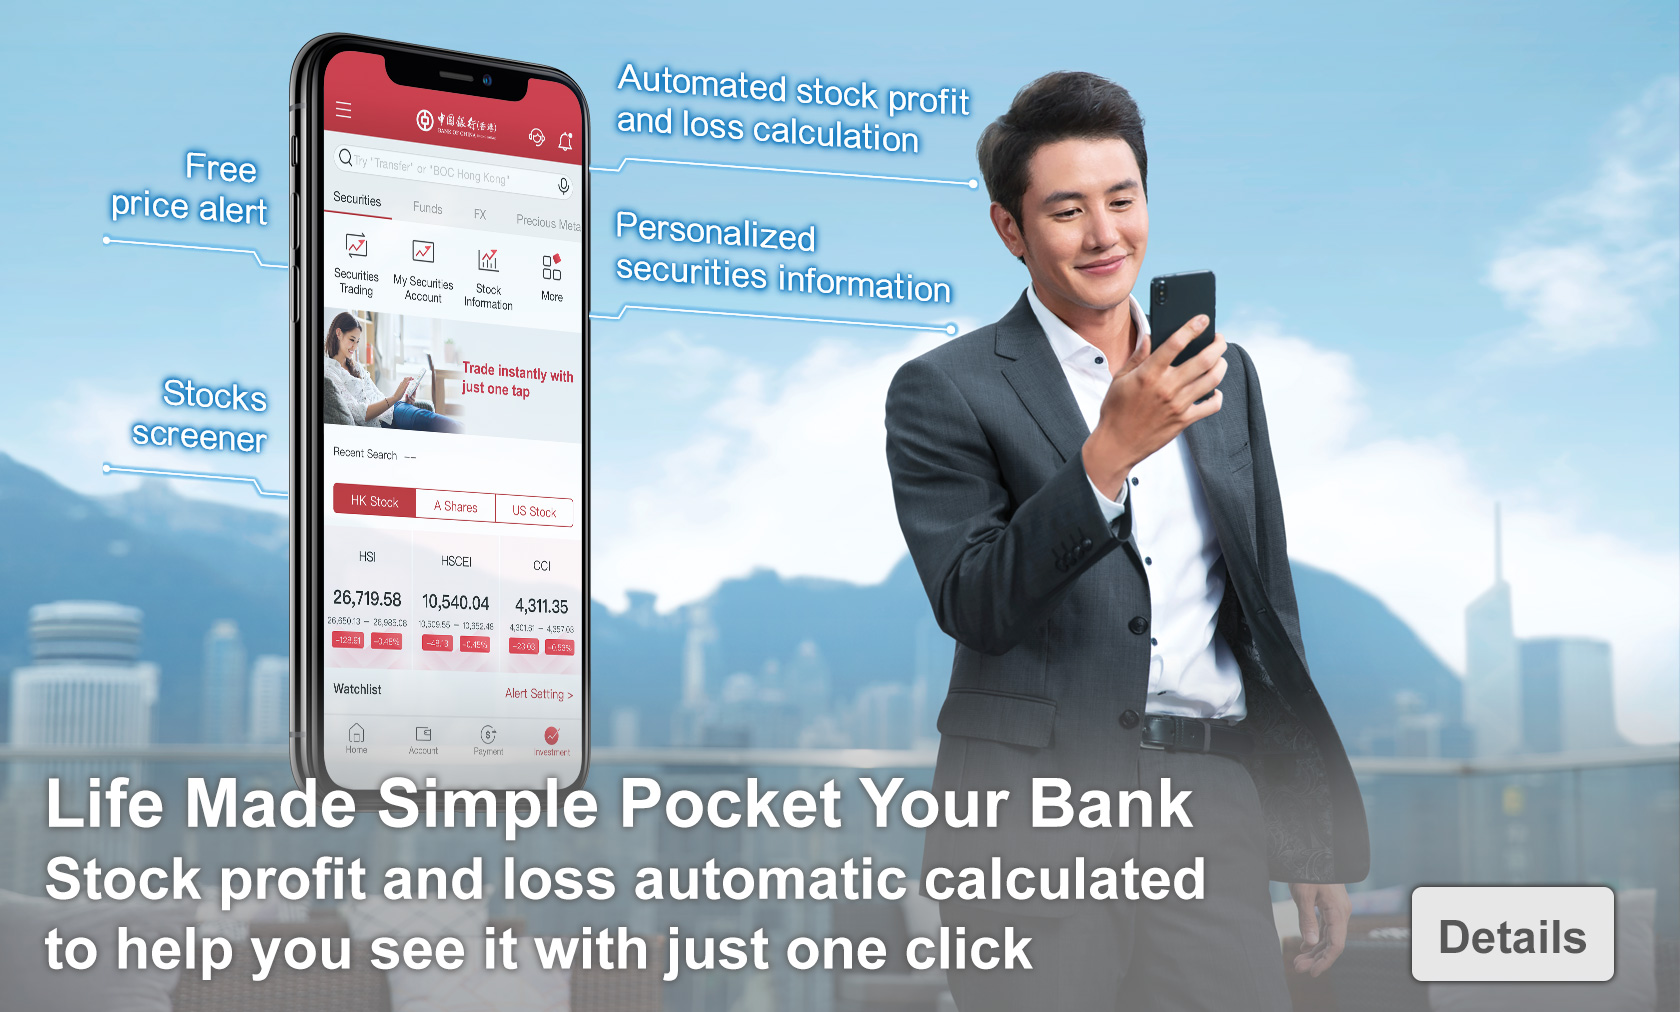 Life Made Simple Pocket Your Bank
        Stock profit and loss automatic calculated to help you see it with just one click